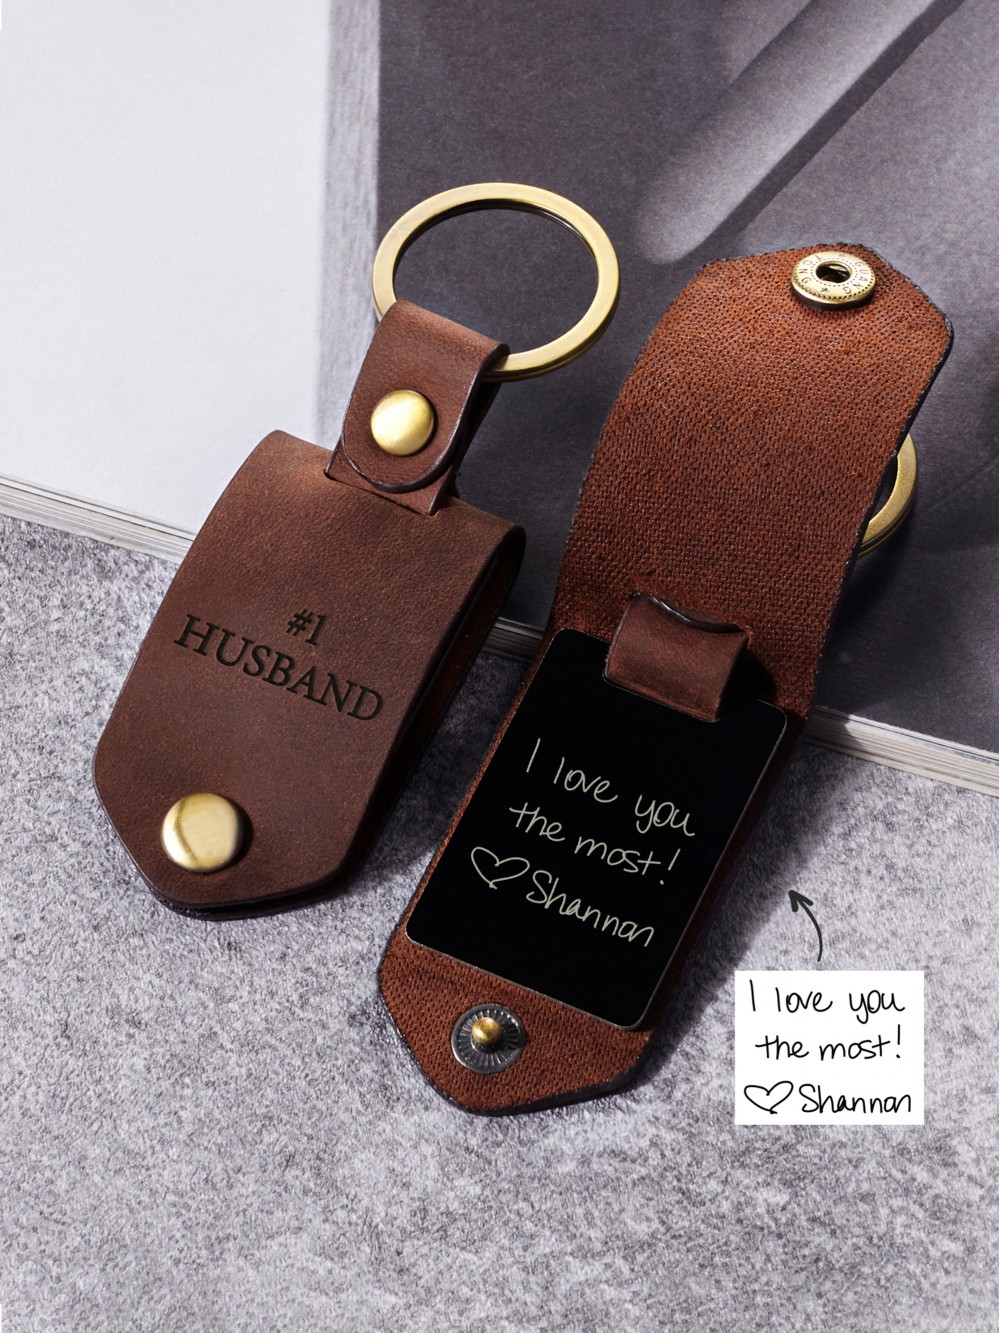 Handwriting Alumnium Keychain with Leather Case for Men